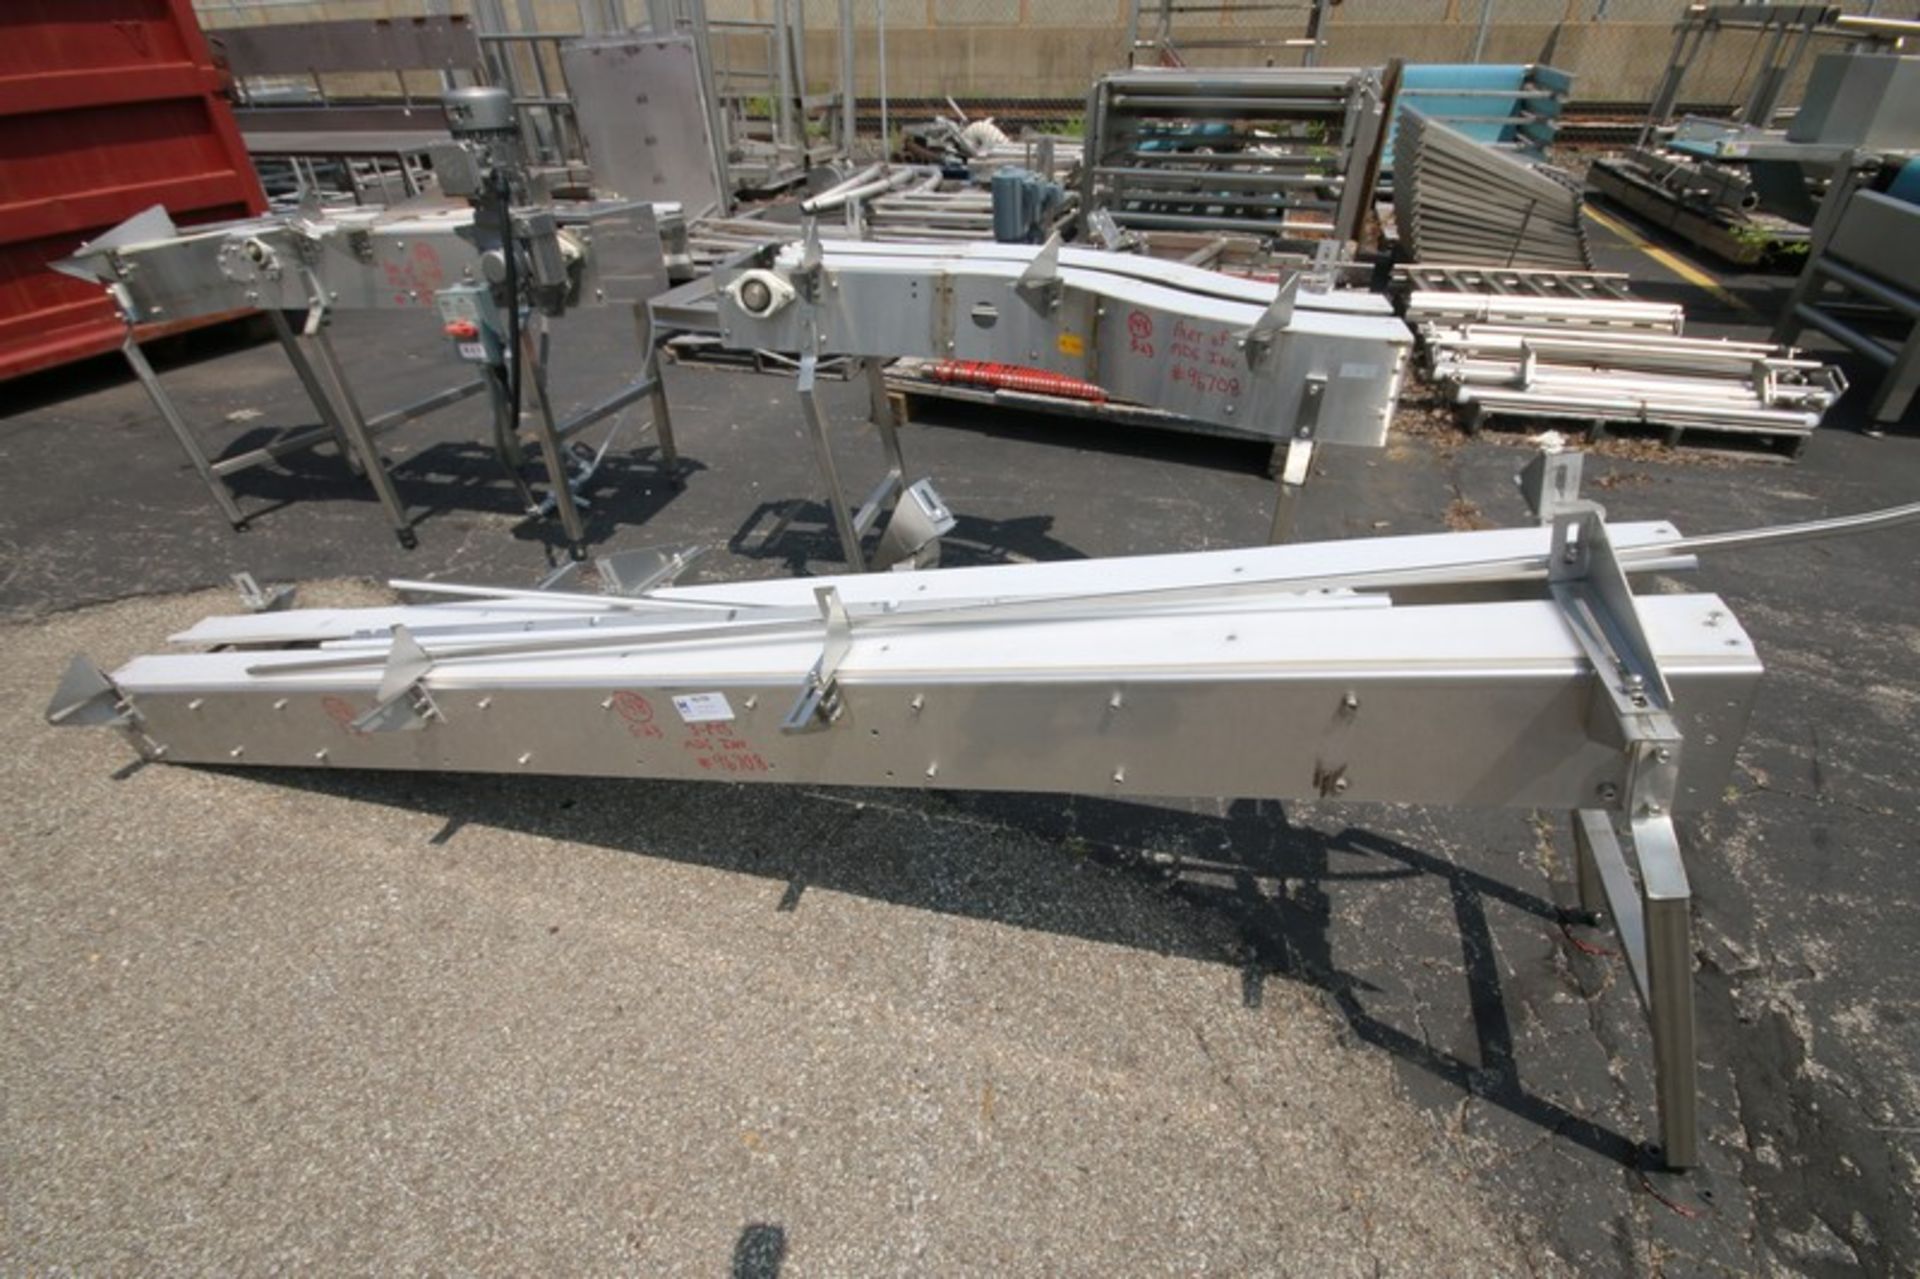 Lot of (3) Sect of 12" S/S Product Conveyor Sections, Includes (1) 64" L S - Bend, (1) 90" L